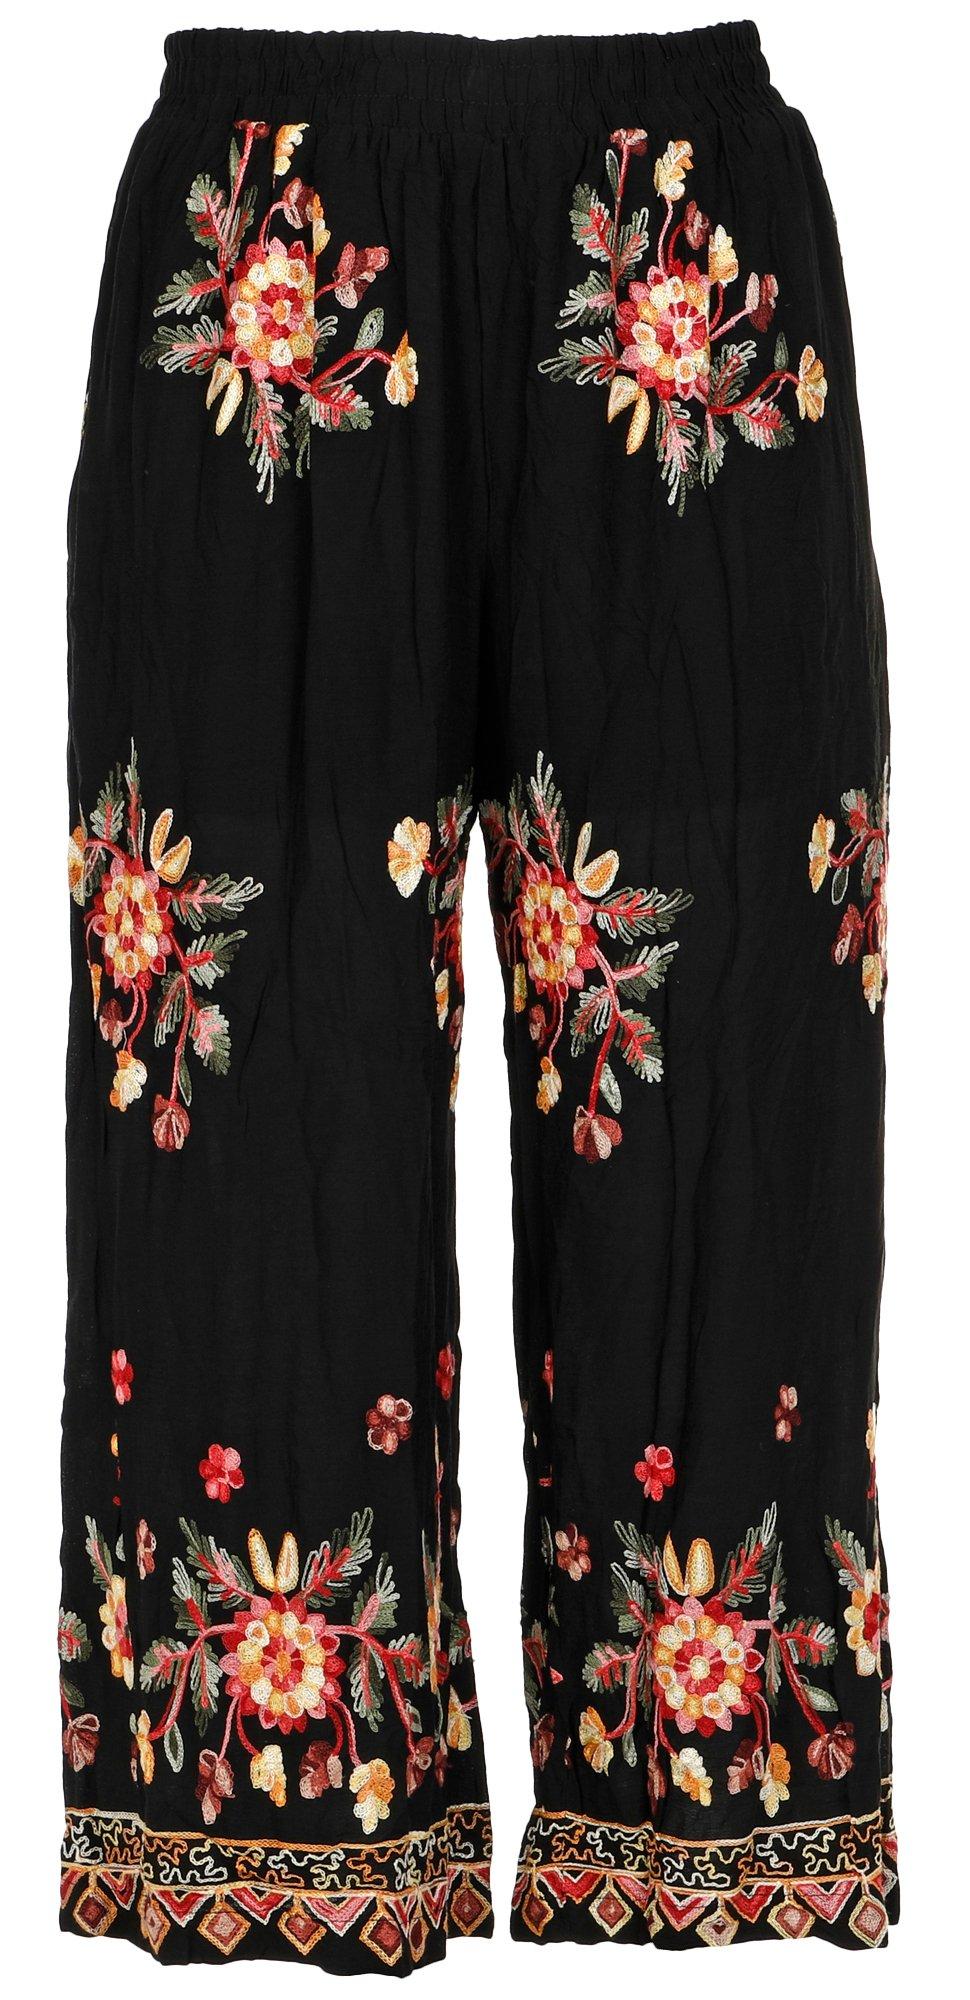 Women's Plus Embroidered Floral Pants